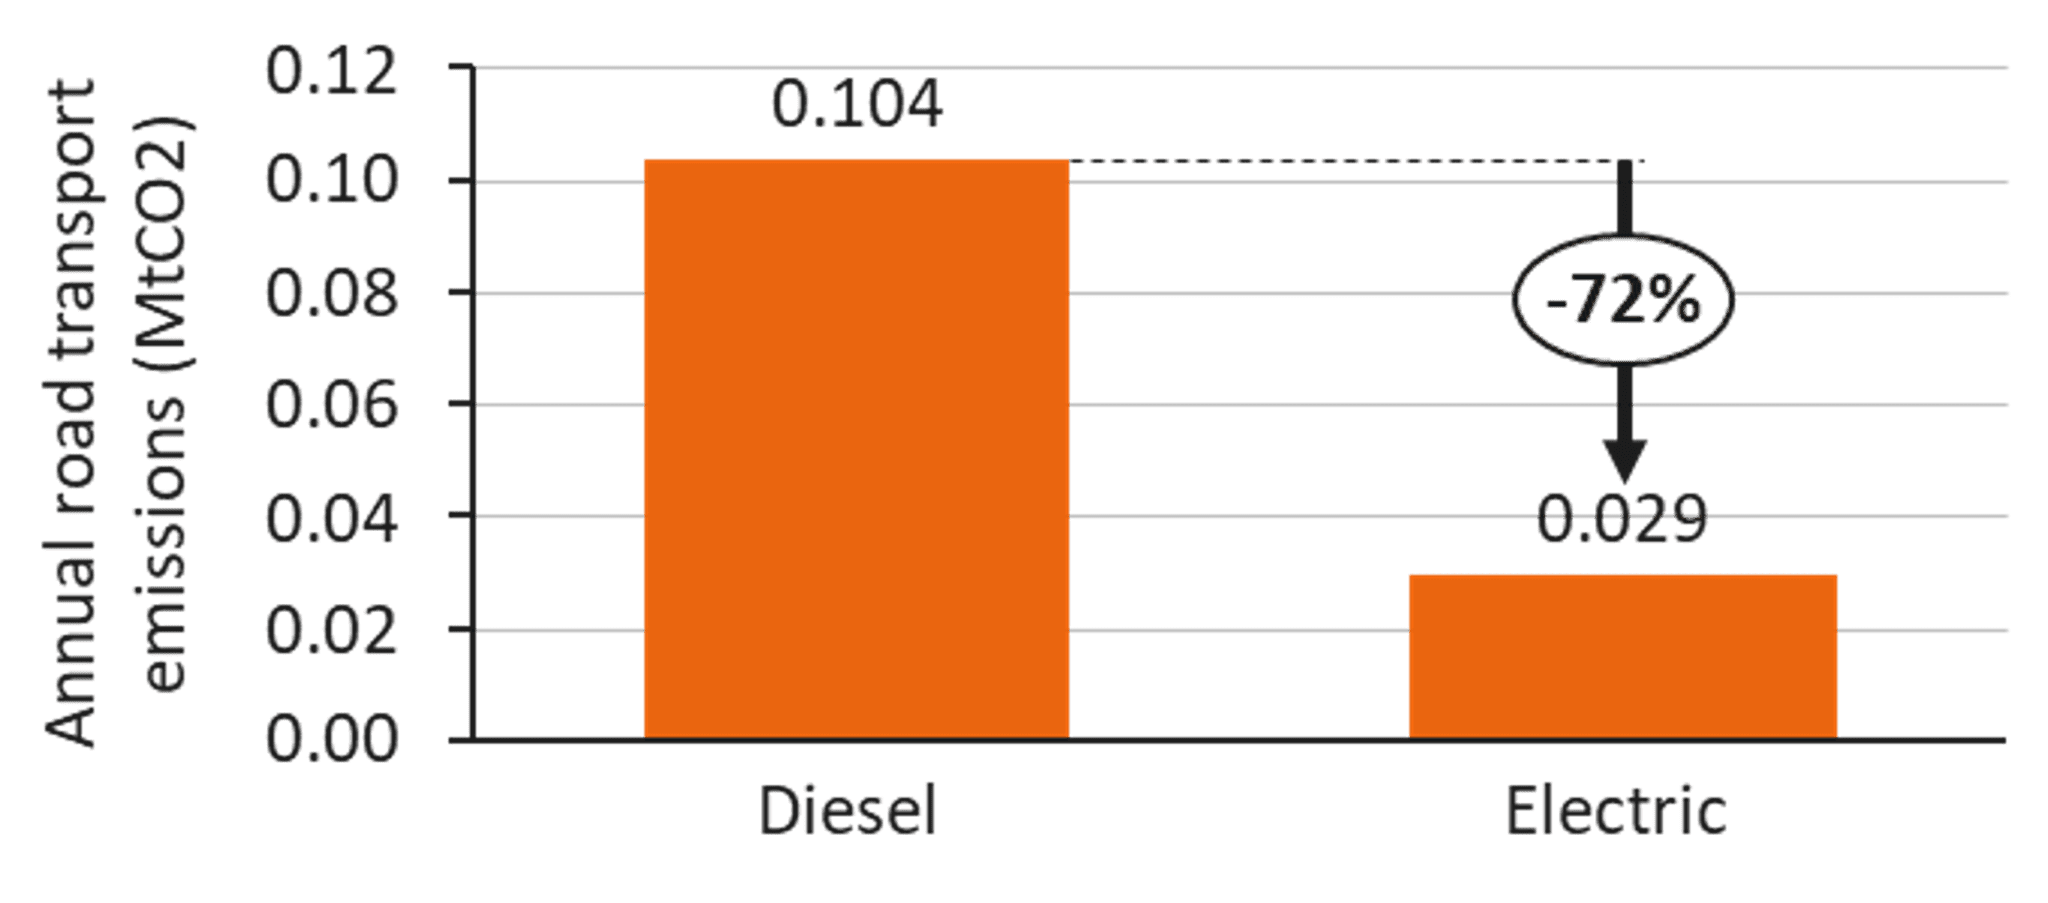 A bar chart (orange bars) shows the annual carbon emissions reduction for electrification of urban buses. The annual carbon dioxide emissions for a fully diesel fleet is 0.104 mega-tonnes of carbon dioxide and the annual carbon dioxide emissions for a fully electrified fleet is 0.029 mega-tonnes of carbon dioxide. 